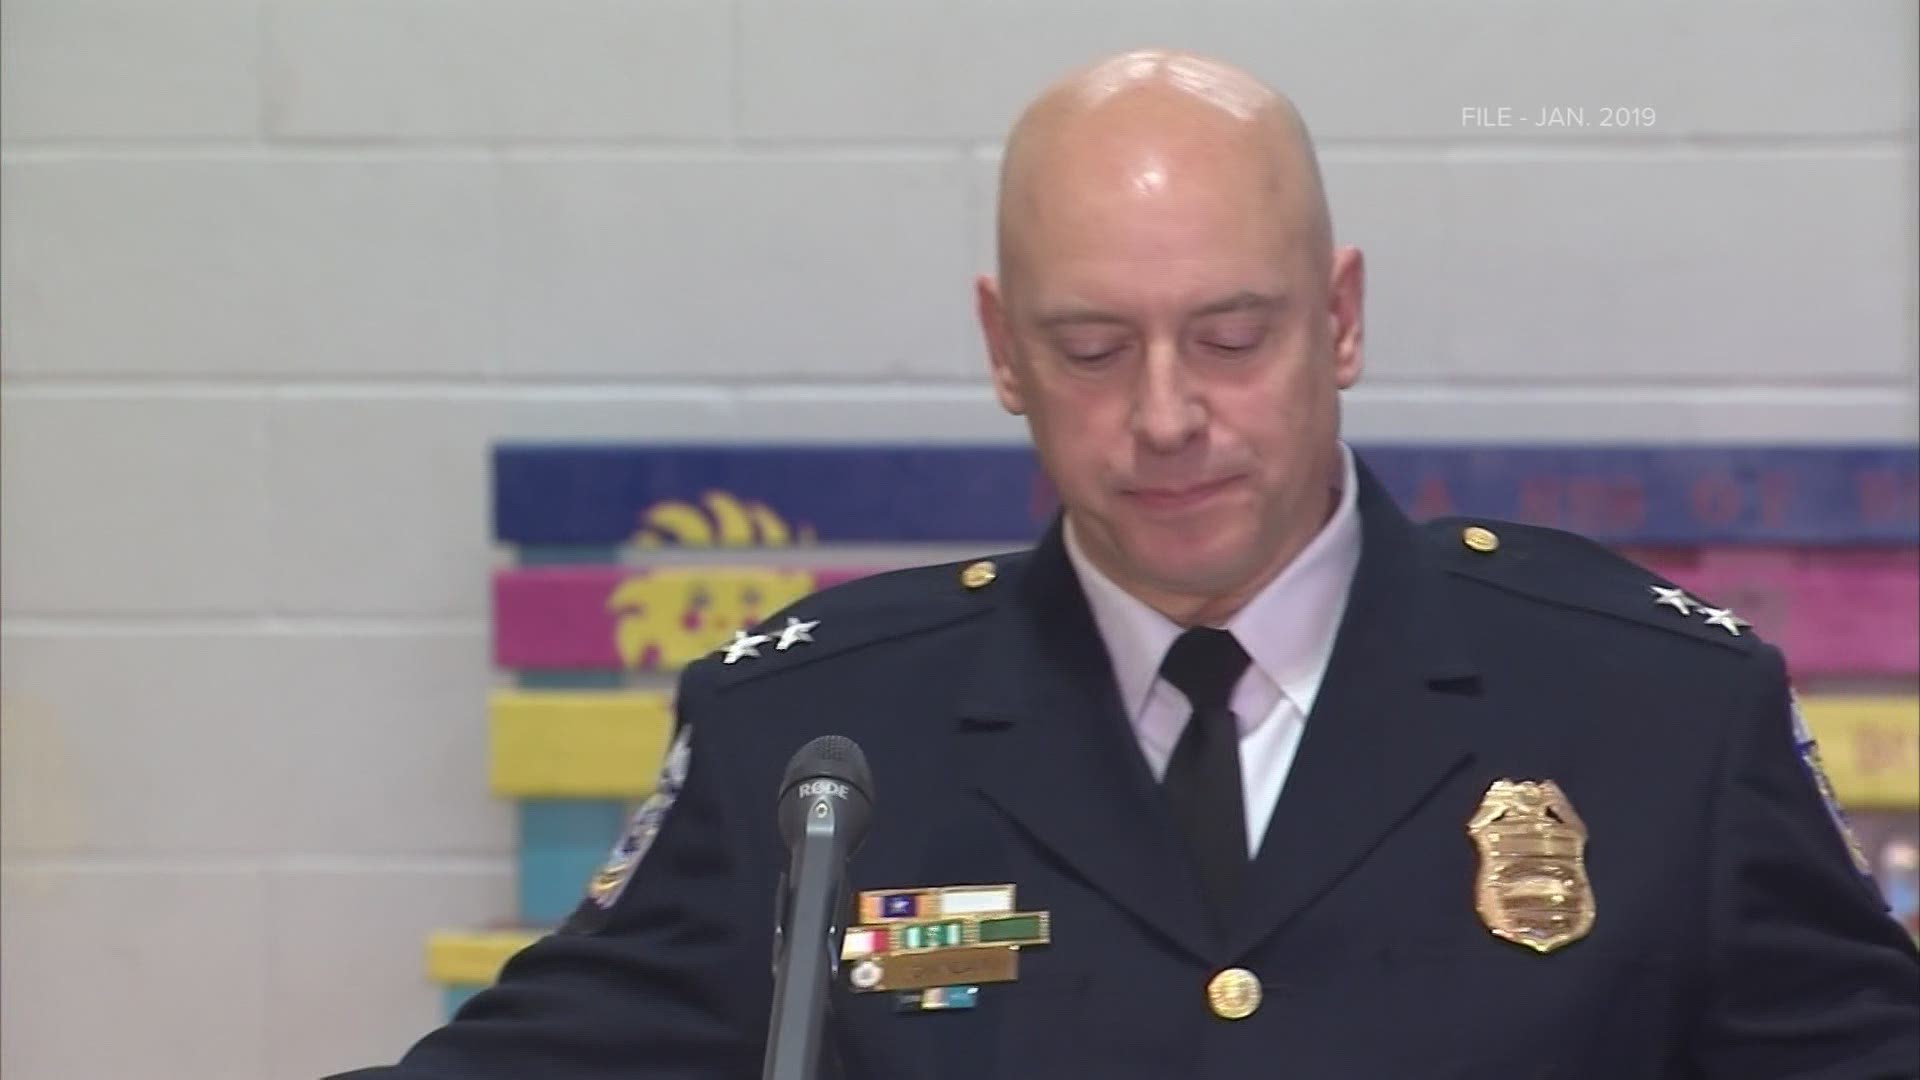 Thomas Quinlan was officially named Columbus Police Chief about a year ago. Mayor Andrew Ginther says he felt like he had no choice but to demote him.